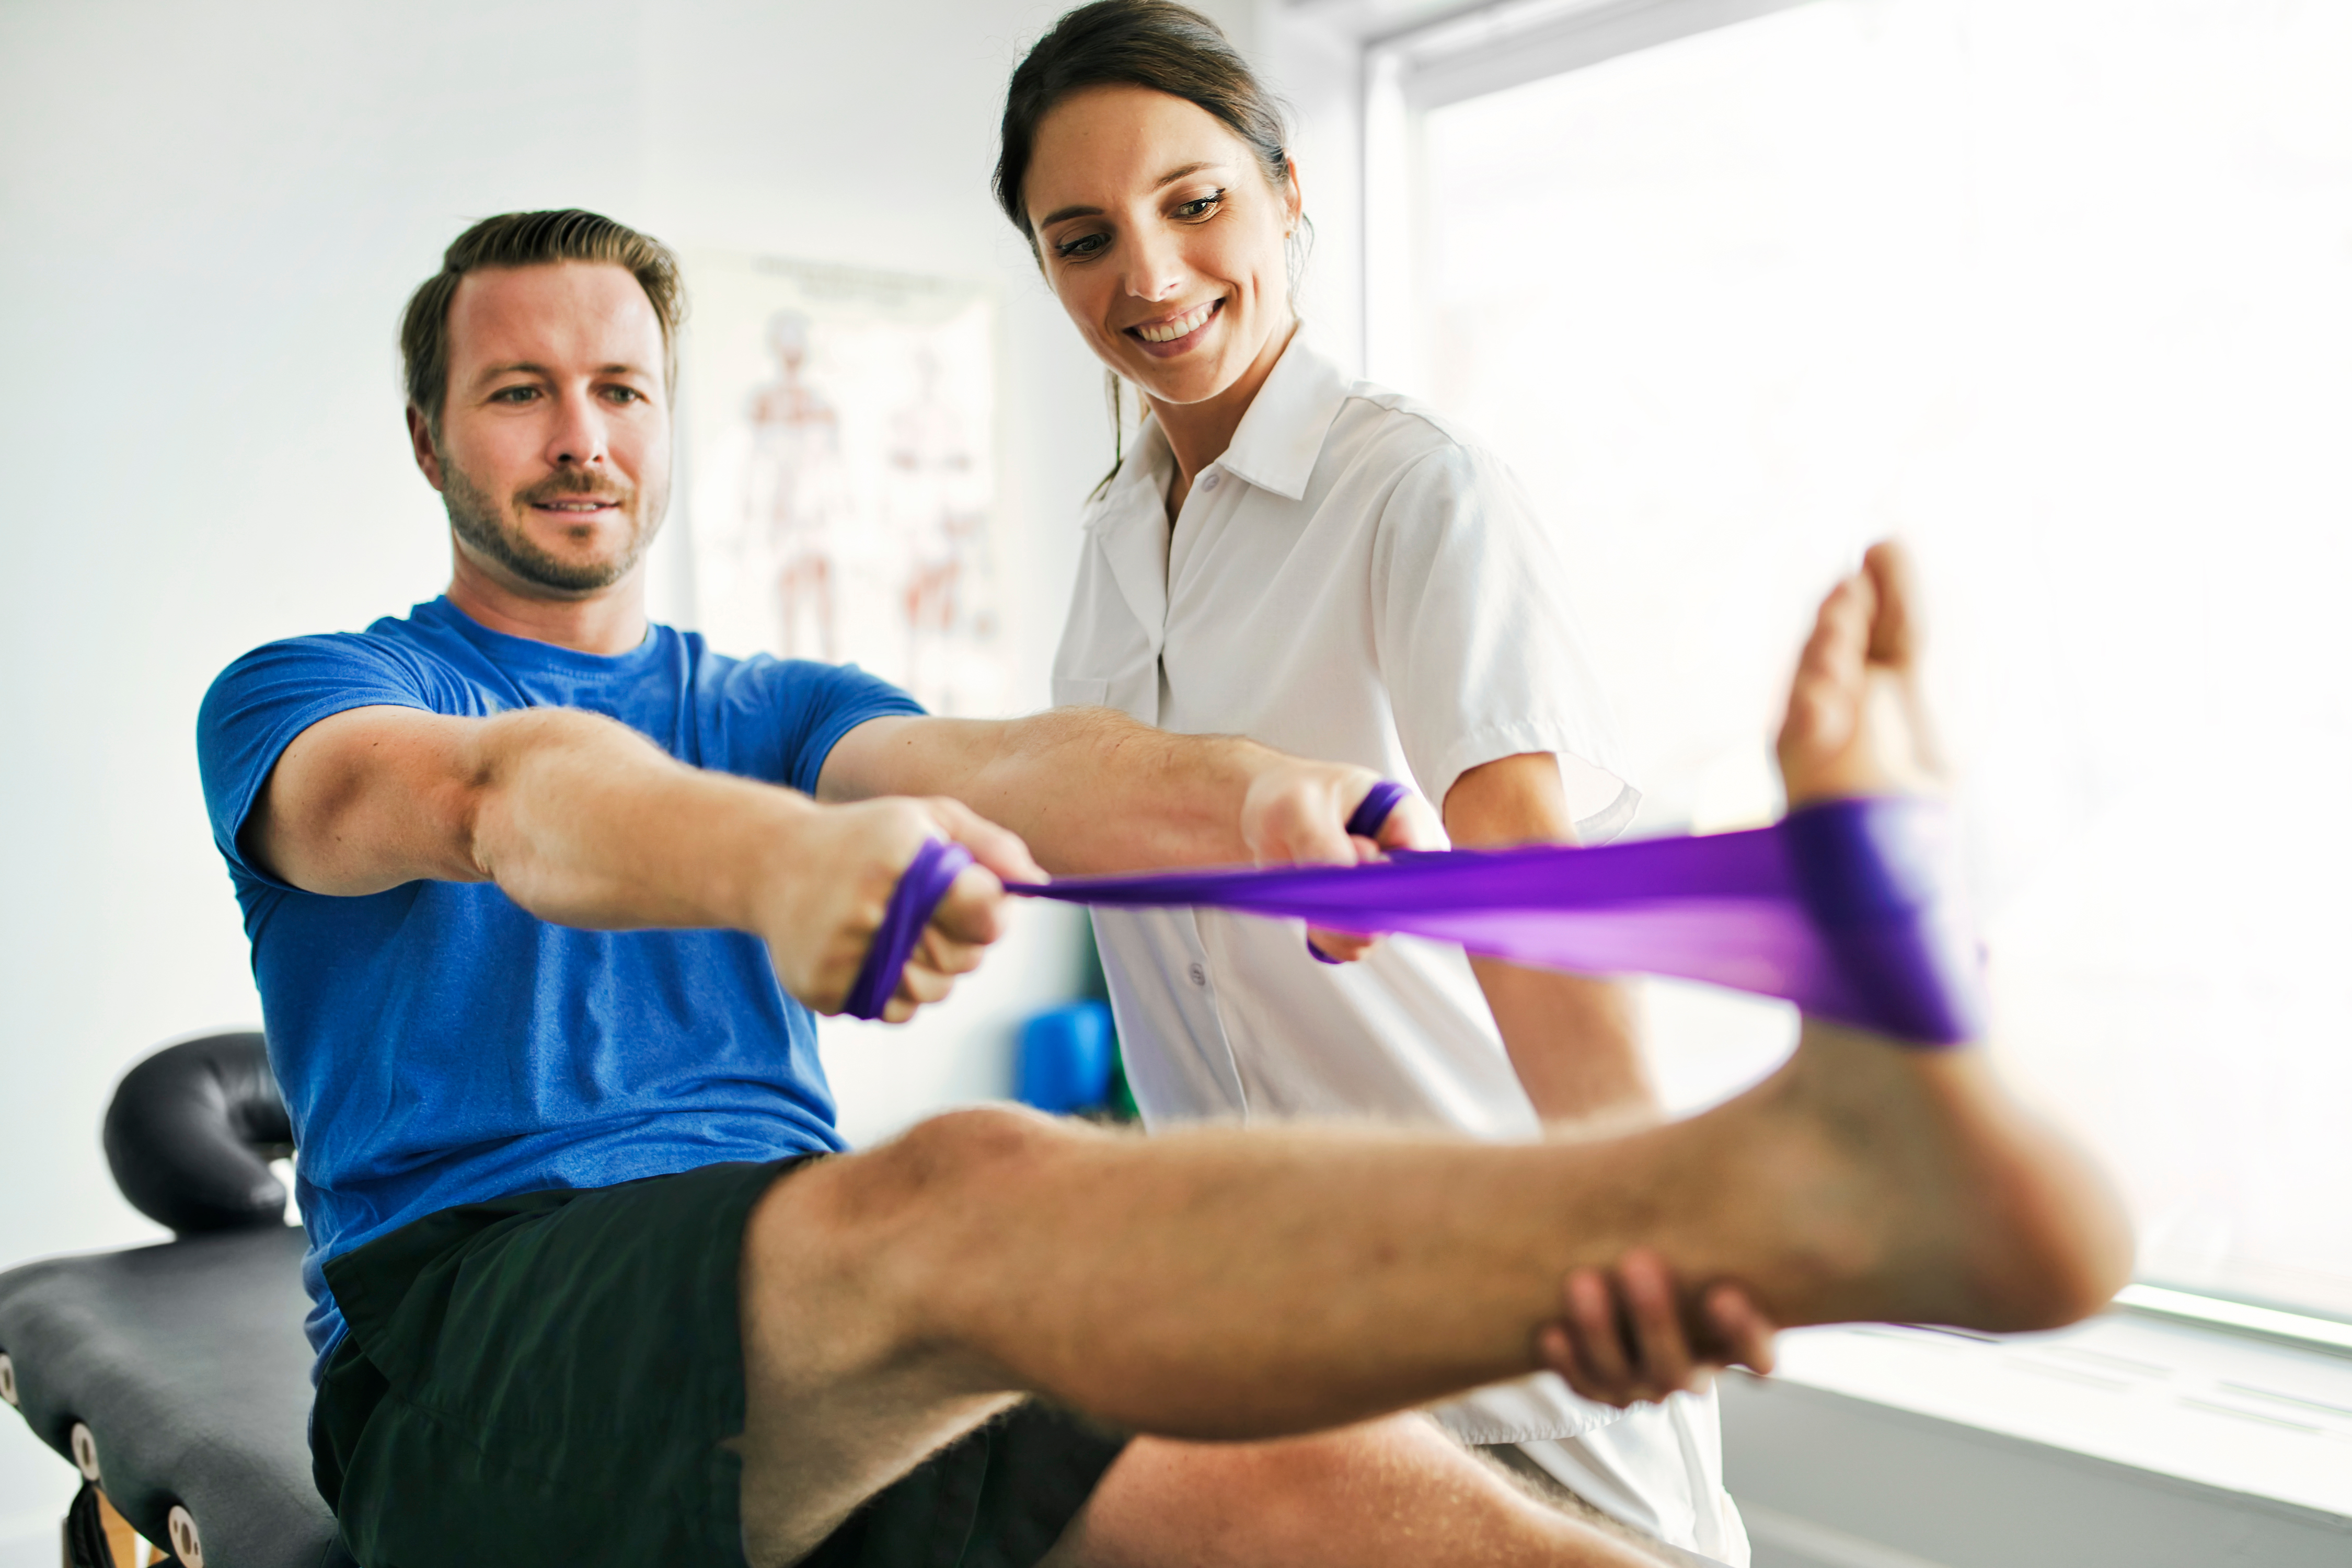 male patient performing a rehabilitation movement with a resistance band while female therapist assists him